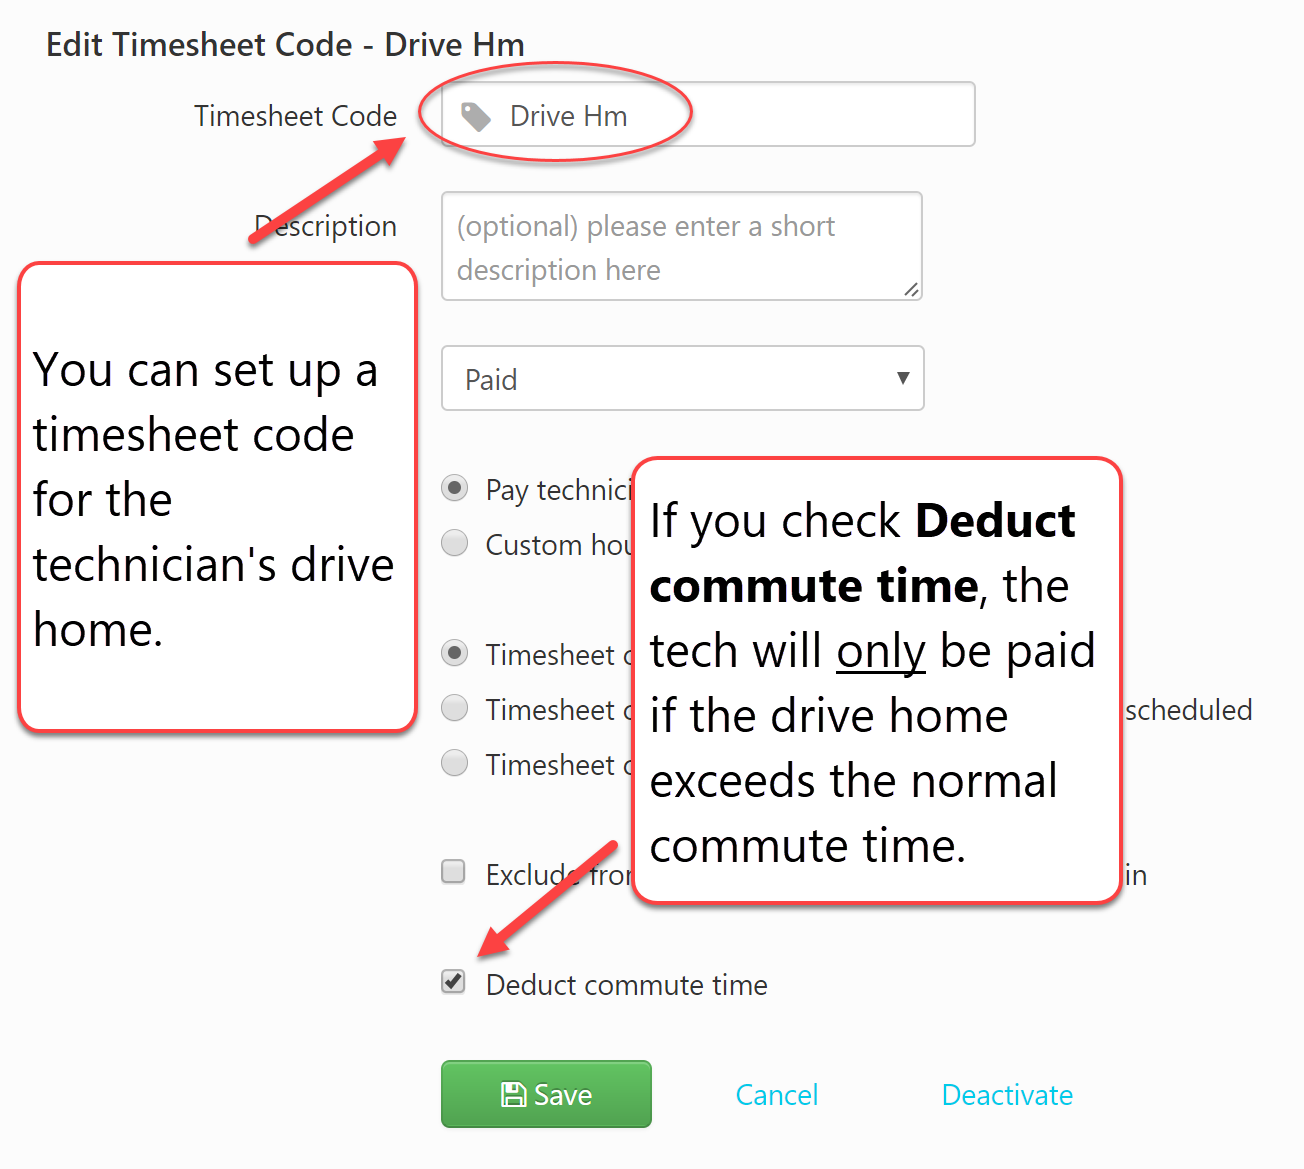 You can set up a timesheet code for the technician's drive home by creating a Drive Home timesheet code, and selecting the Deduct commute time option to only pay the technician if the drive home exceeds the normal commute time. 